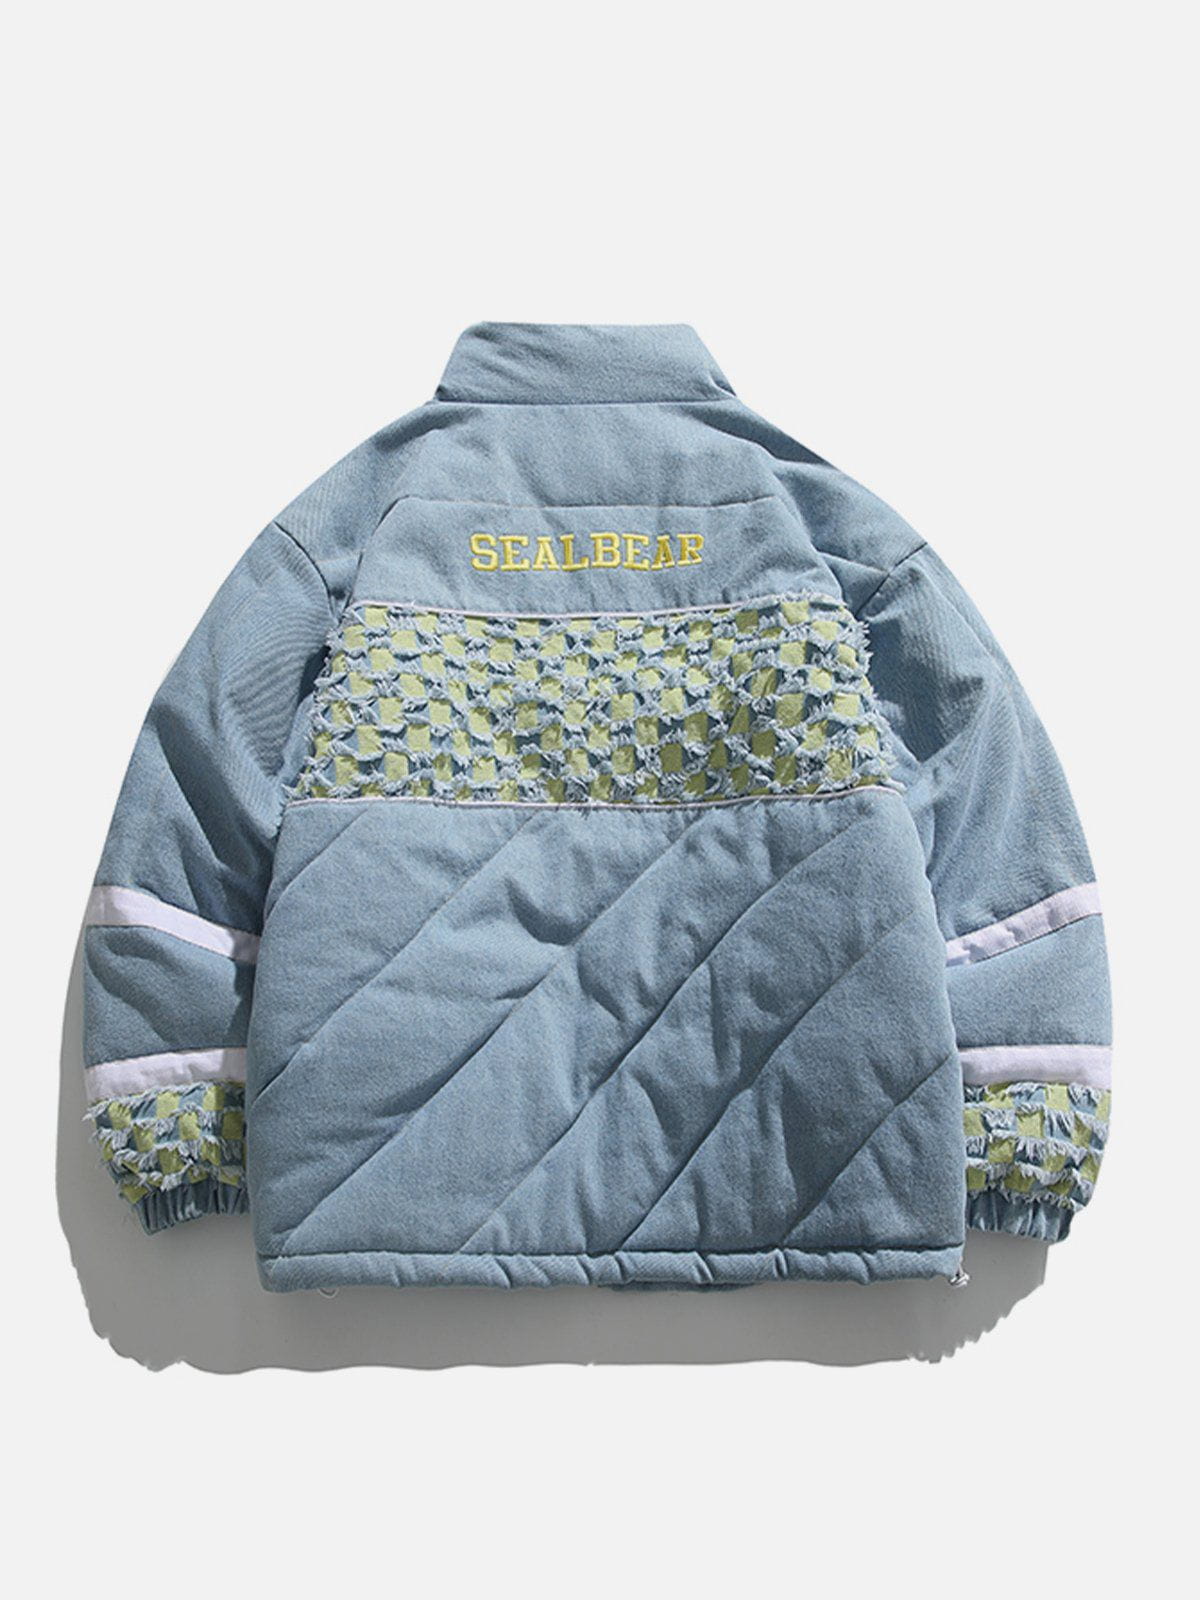 LUXENFY™ - Denim Patchwork Embroidery Winter Coat luxenfy.com